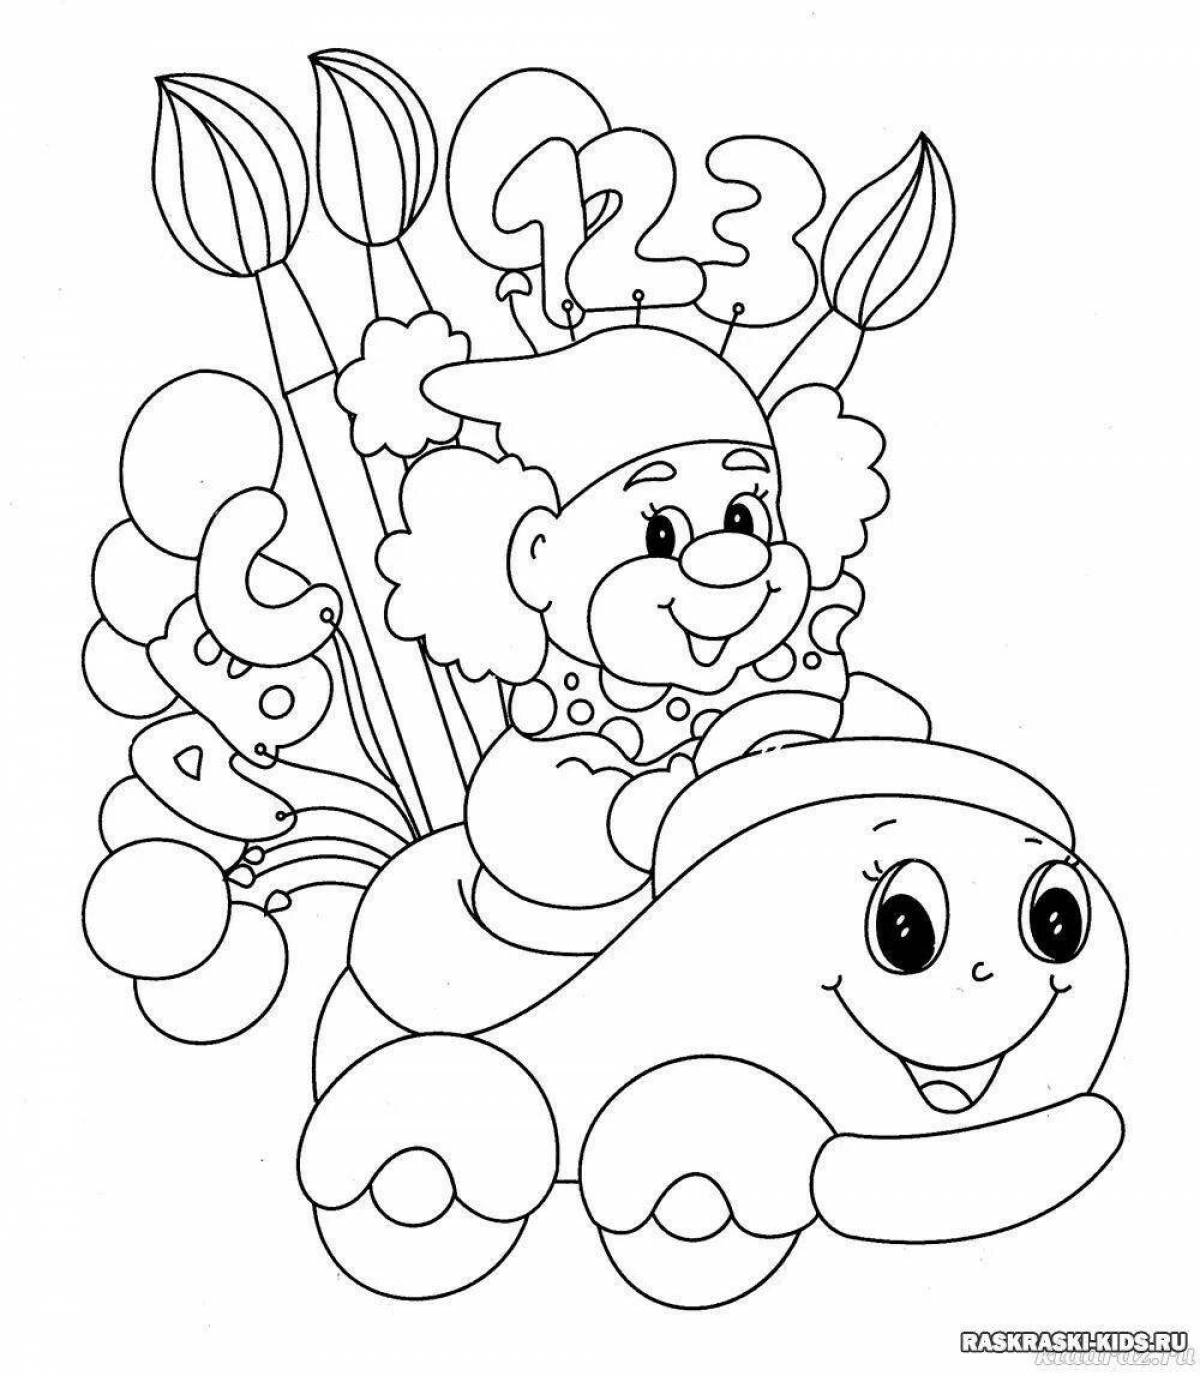 Coloring pages for kids for kids #14